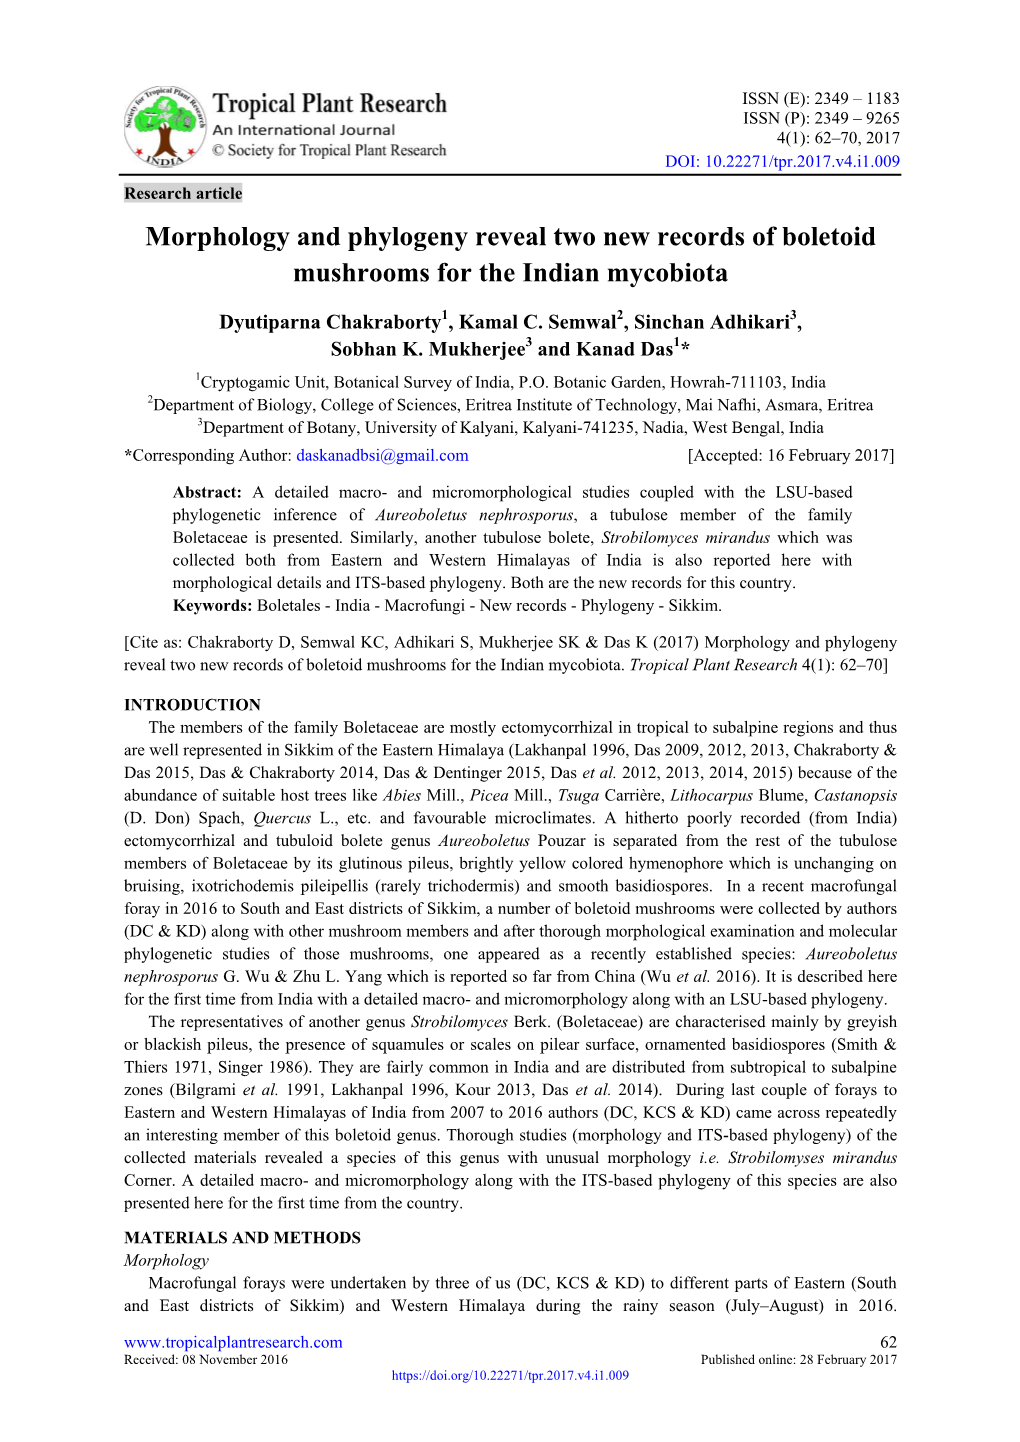 Morphology and Phylogeny Reveal Two New Records of Boletoid Mushrooms for the Indian Mycobiota